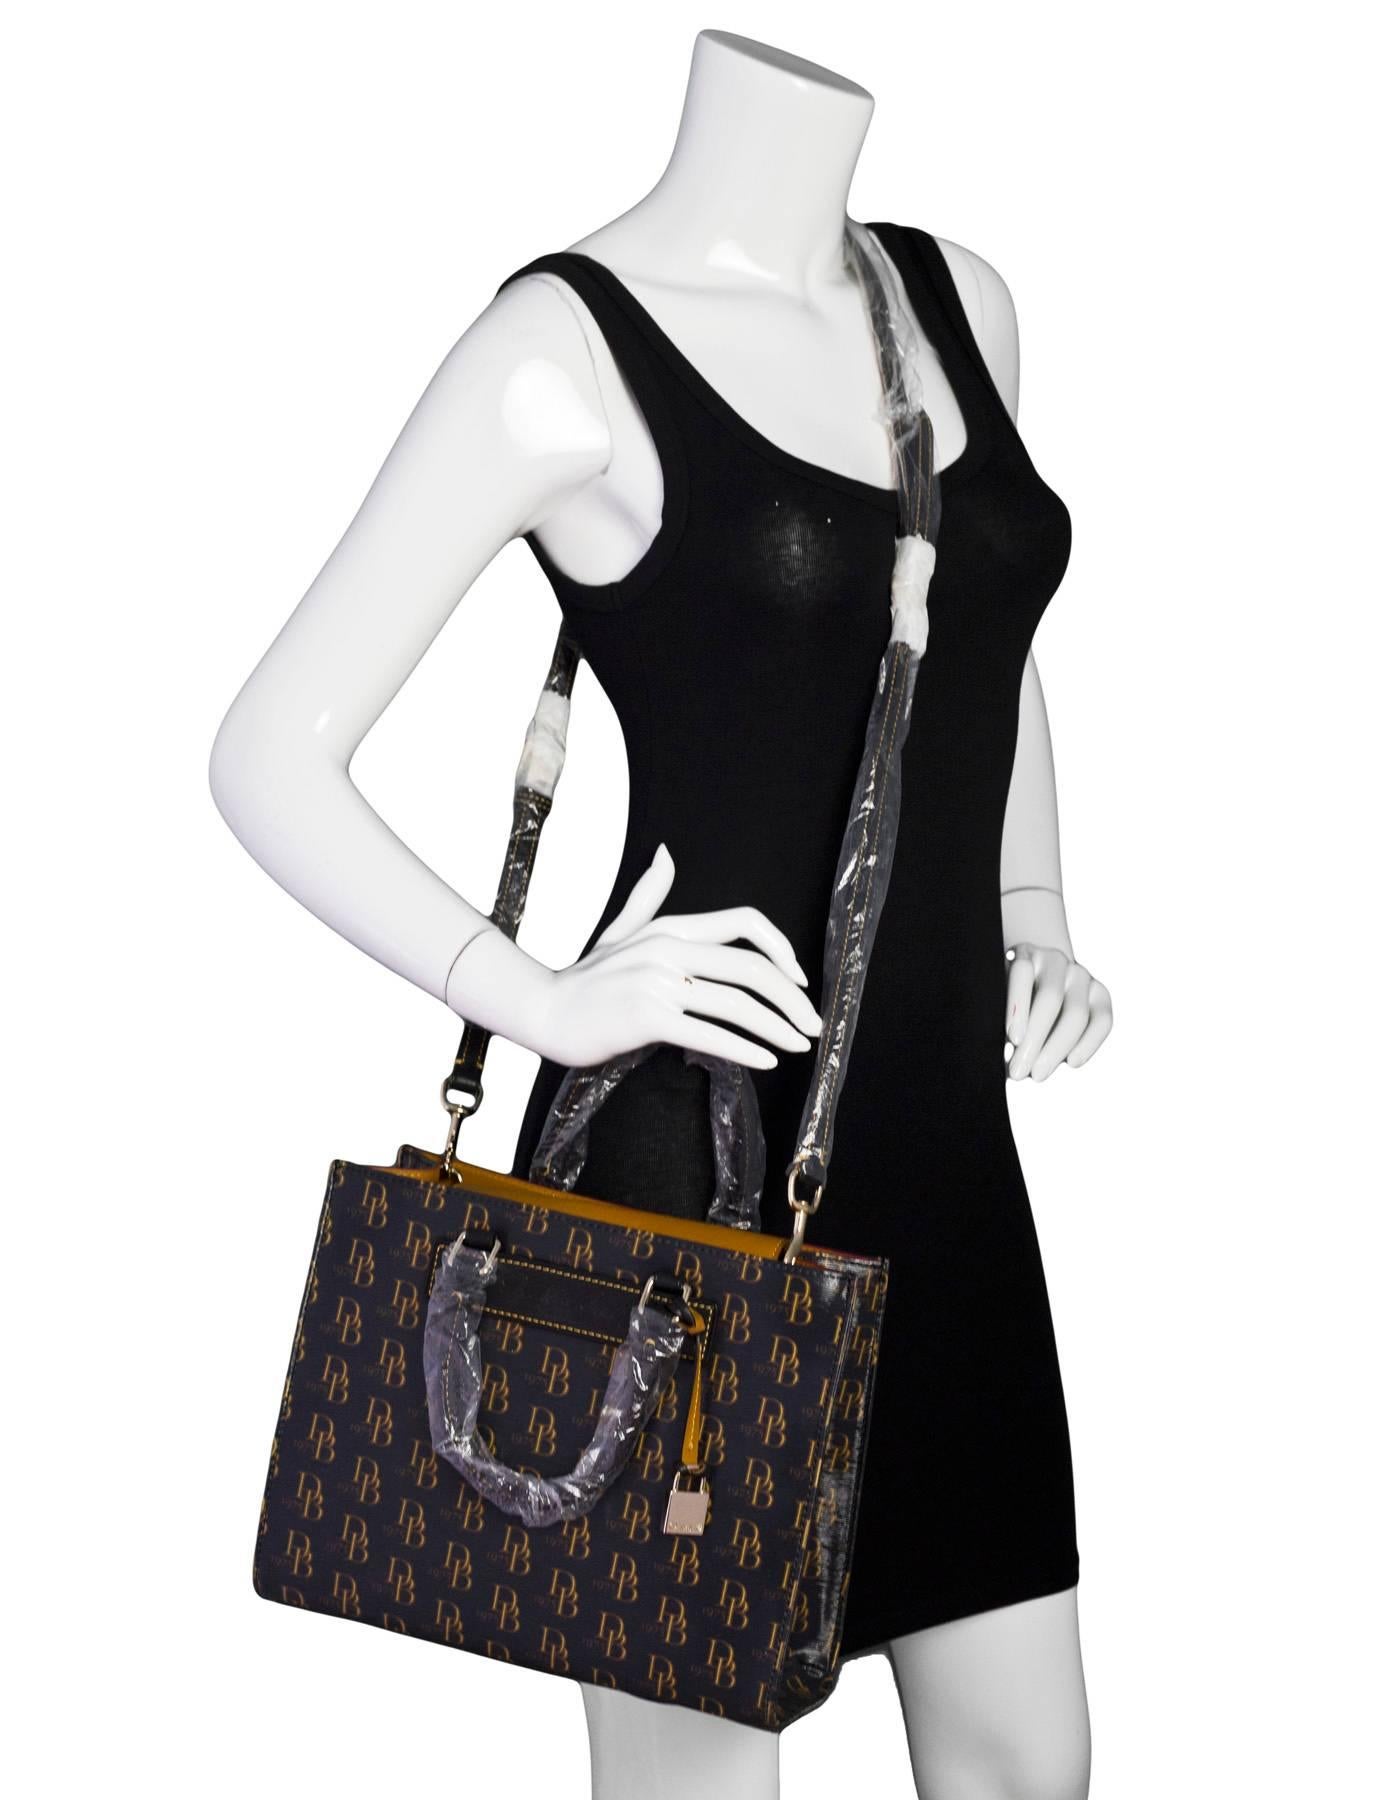 Dooney & Bourke Black Monogram Medium Janine Satchel NWT

Color: Black, tan
Hardware: Goldtone
Materials: Coated canvas, leather, metal
Lining: Red textile
Closure/Opening: Open top with center flap and snap
Exterior Pockets: None
Interior Pockets: